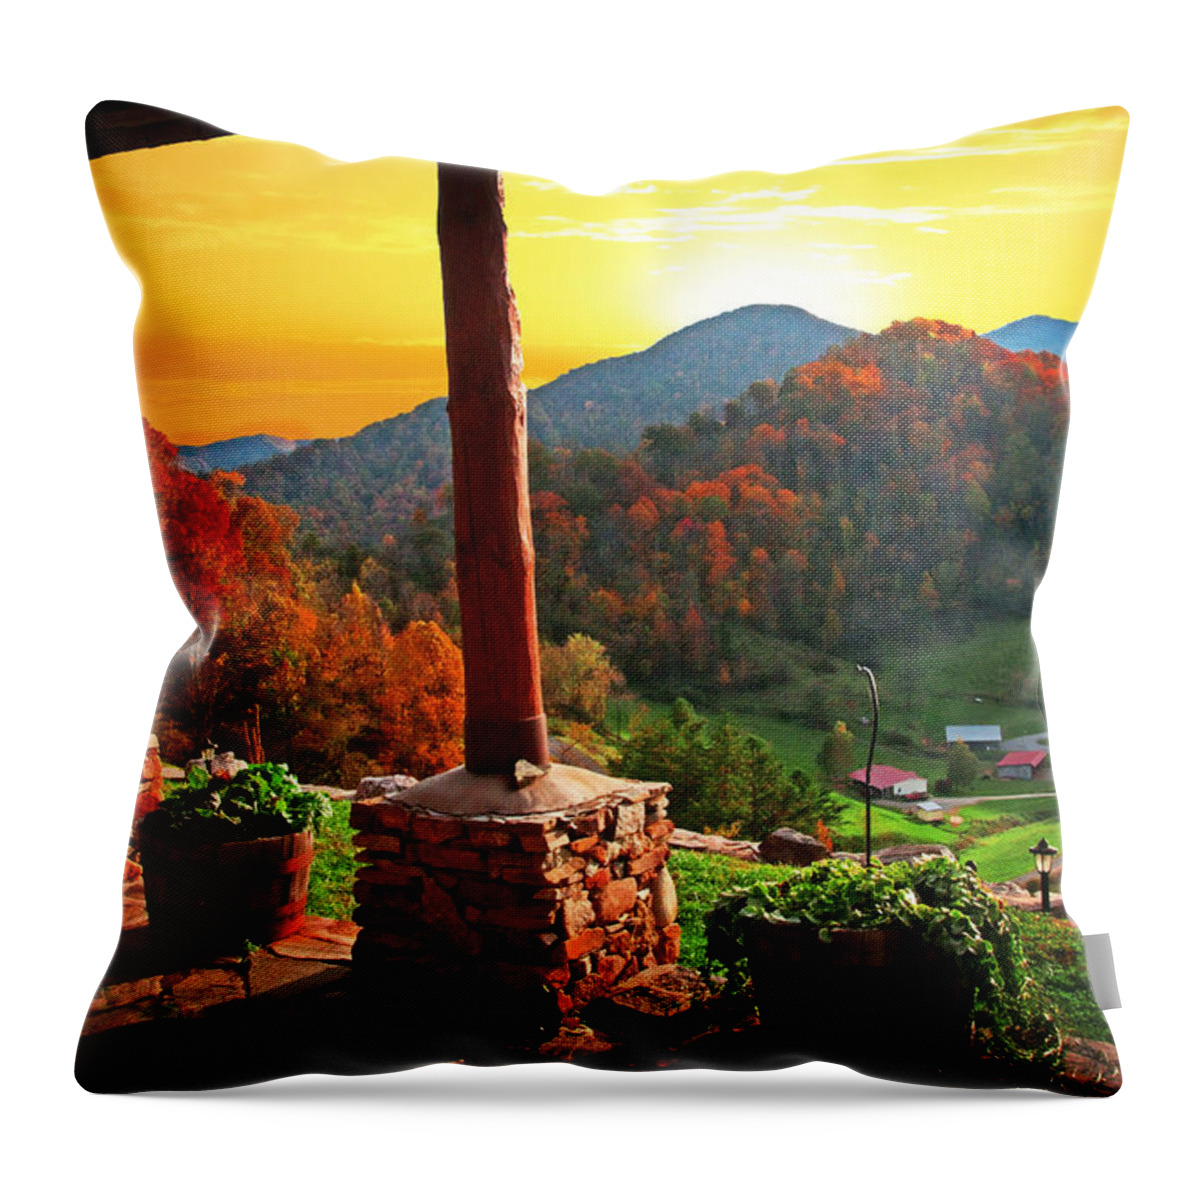 Landscape Throw Pillow featuring the photograph Back Porch Paradise by Lynn Bauer